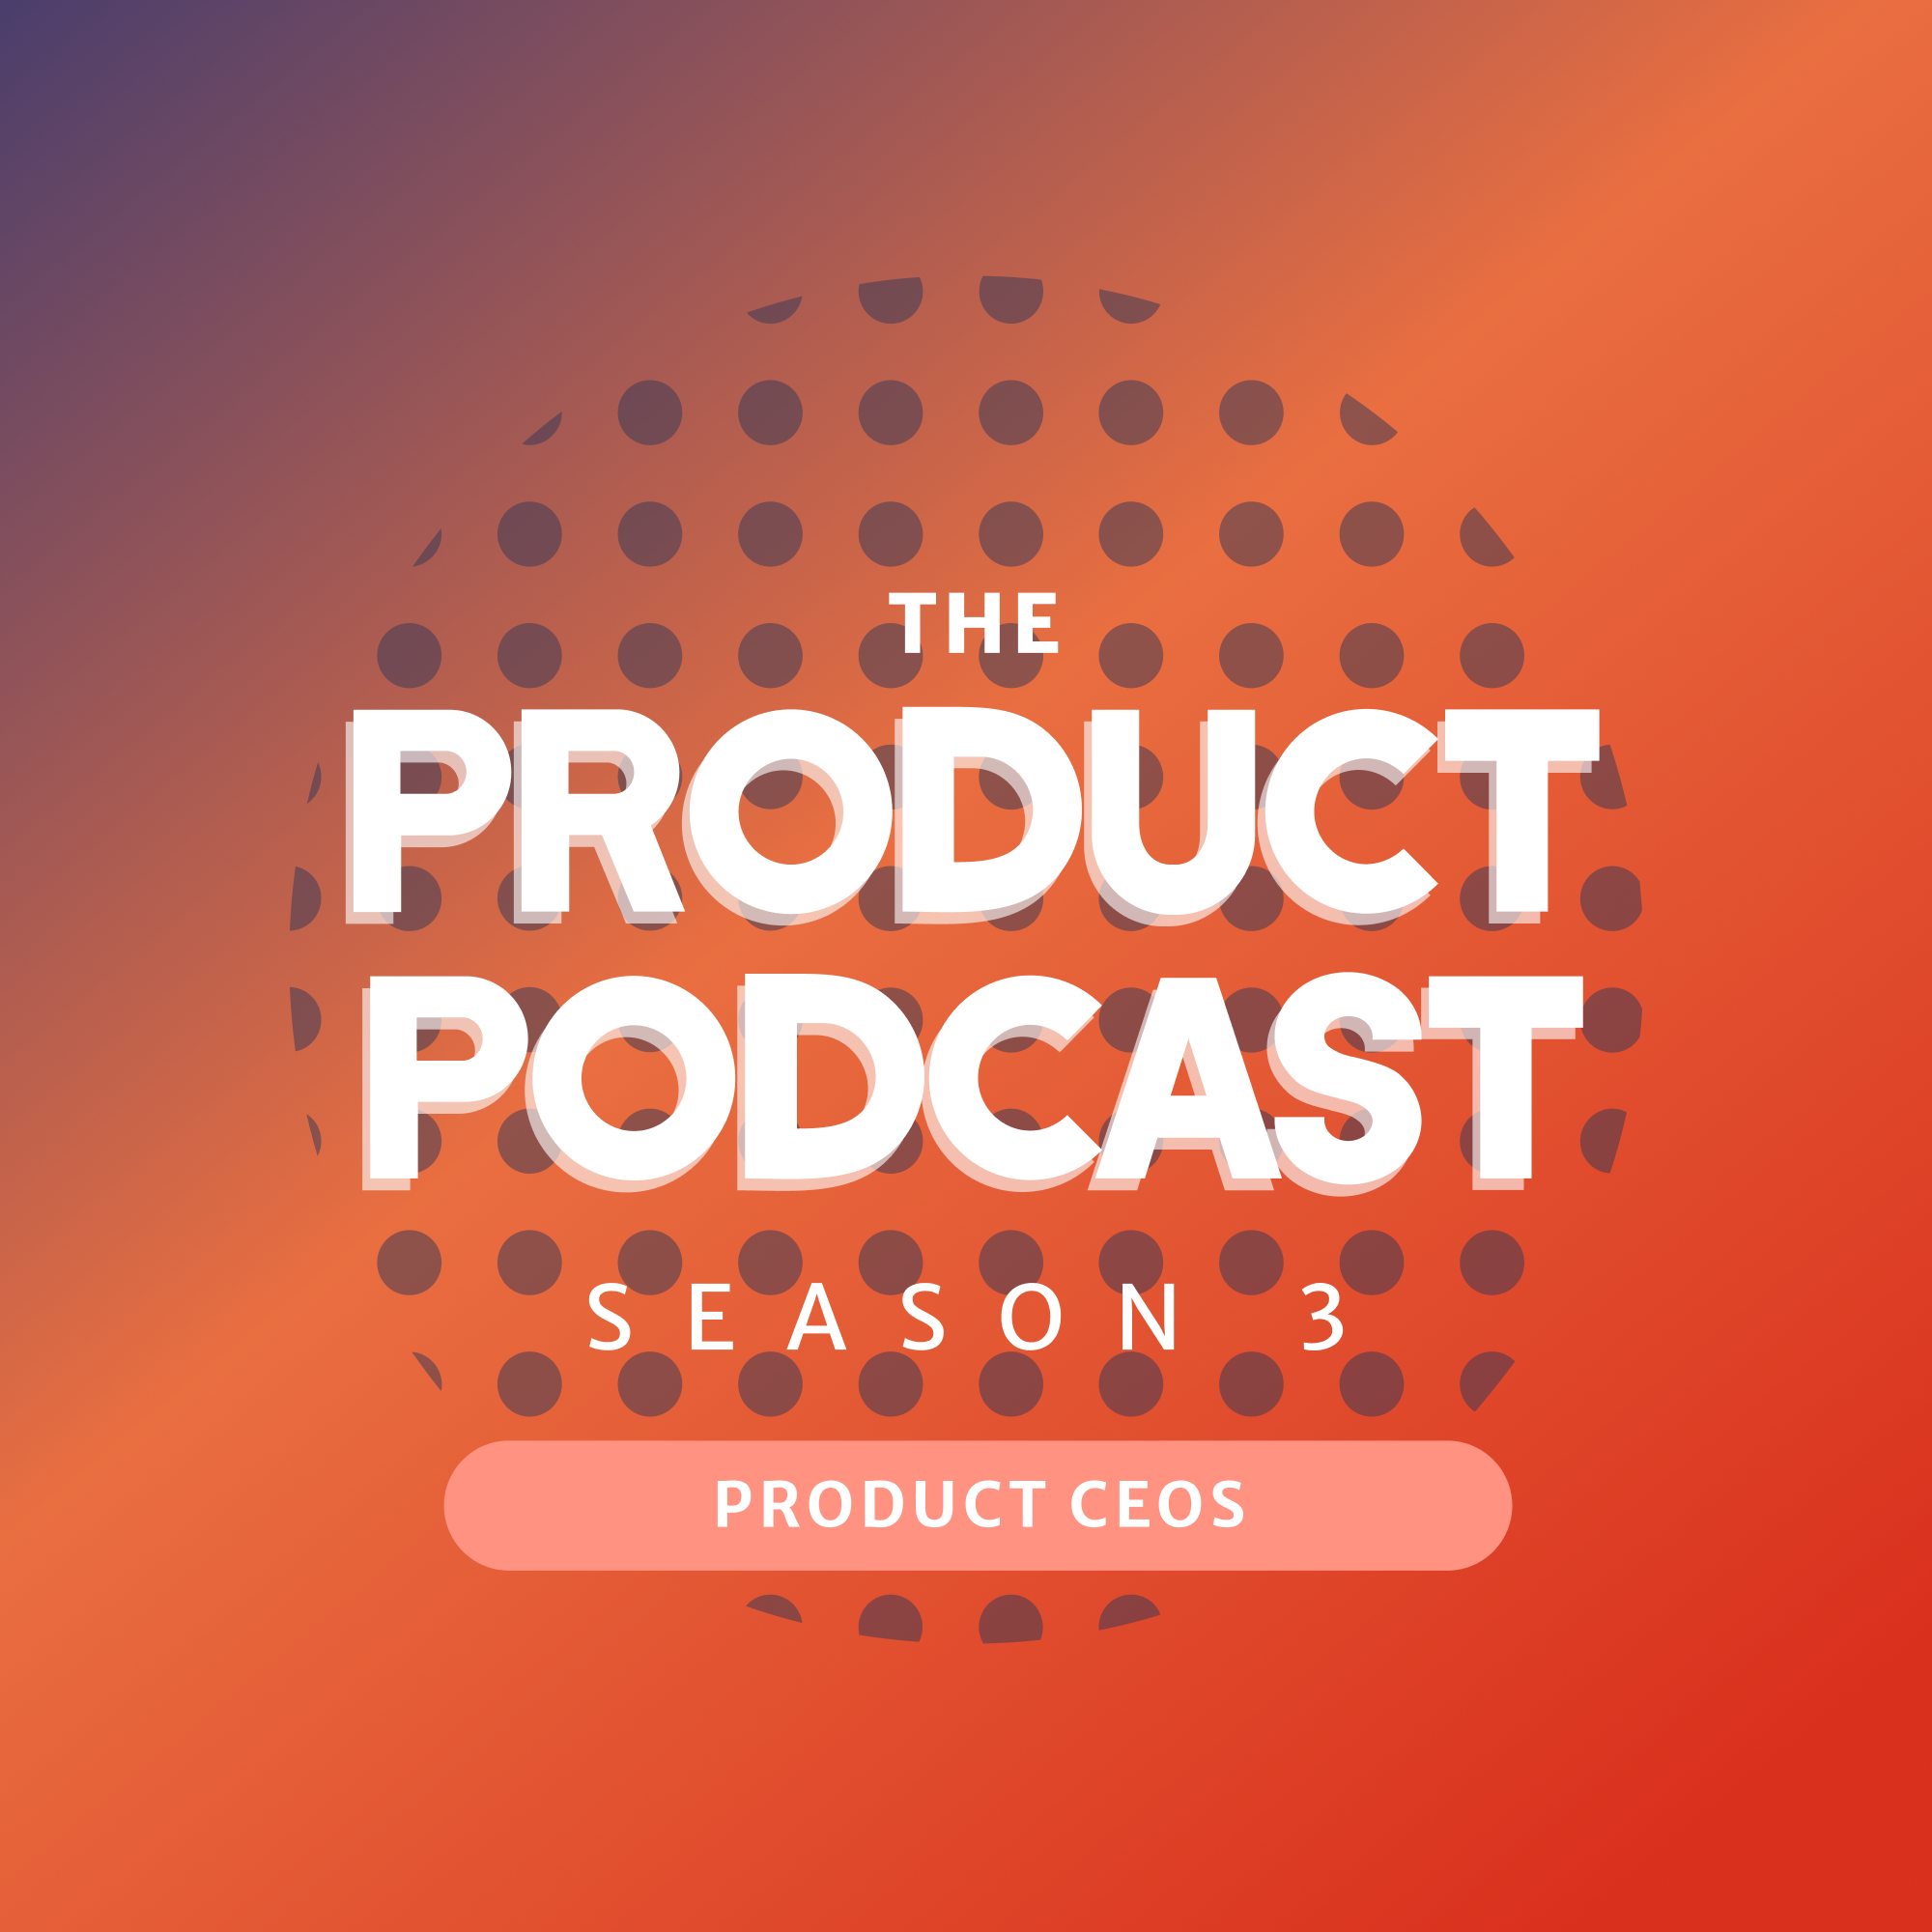 Product Podcast Season 2 Cover "Product CEOs"